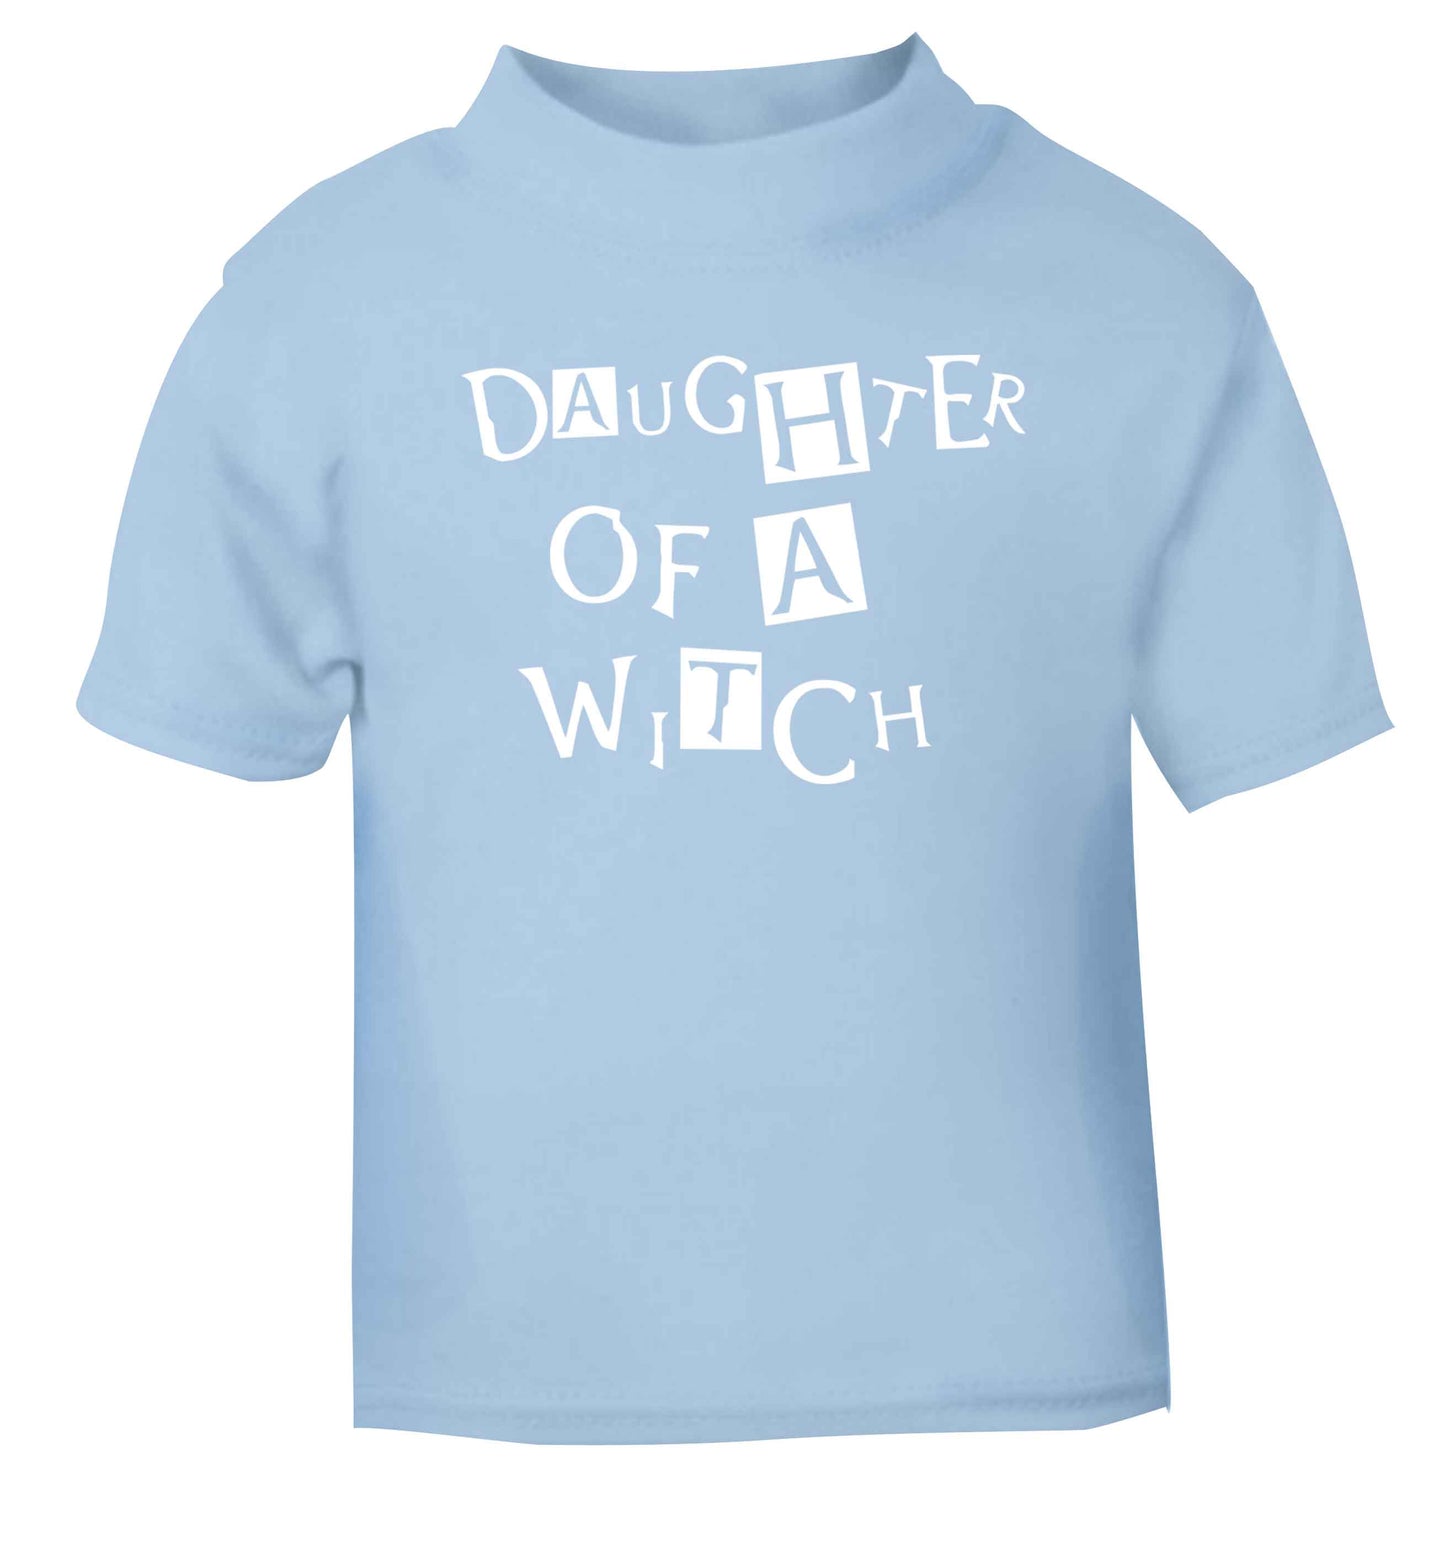 Daughter of a witch light blue baby toddler Tshirt 2 Years